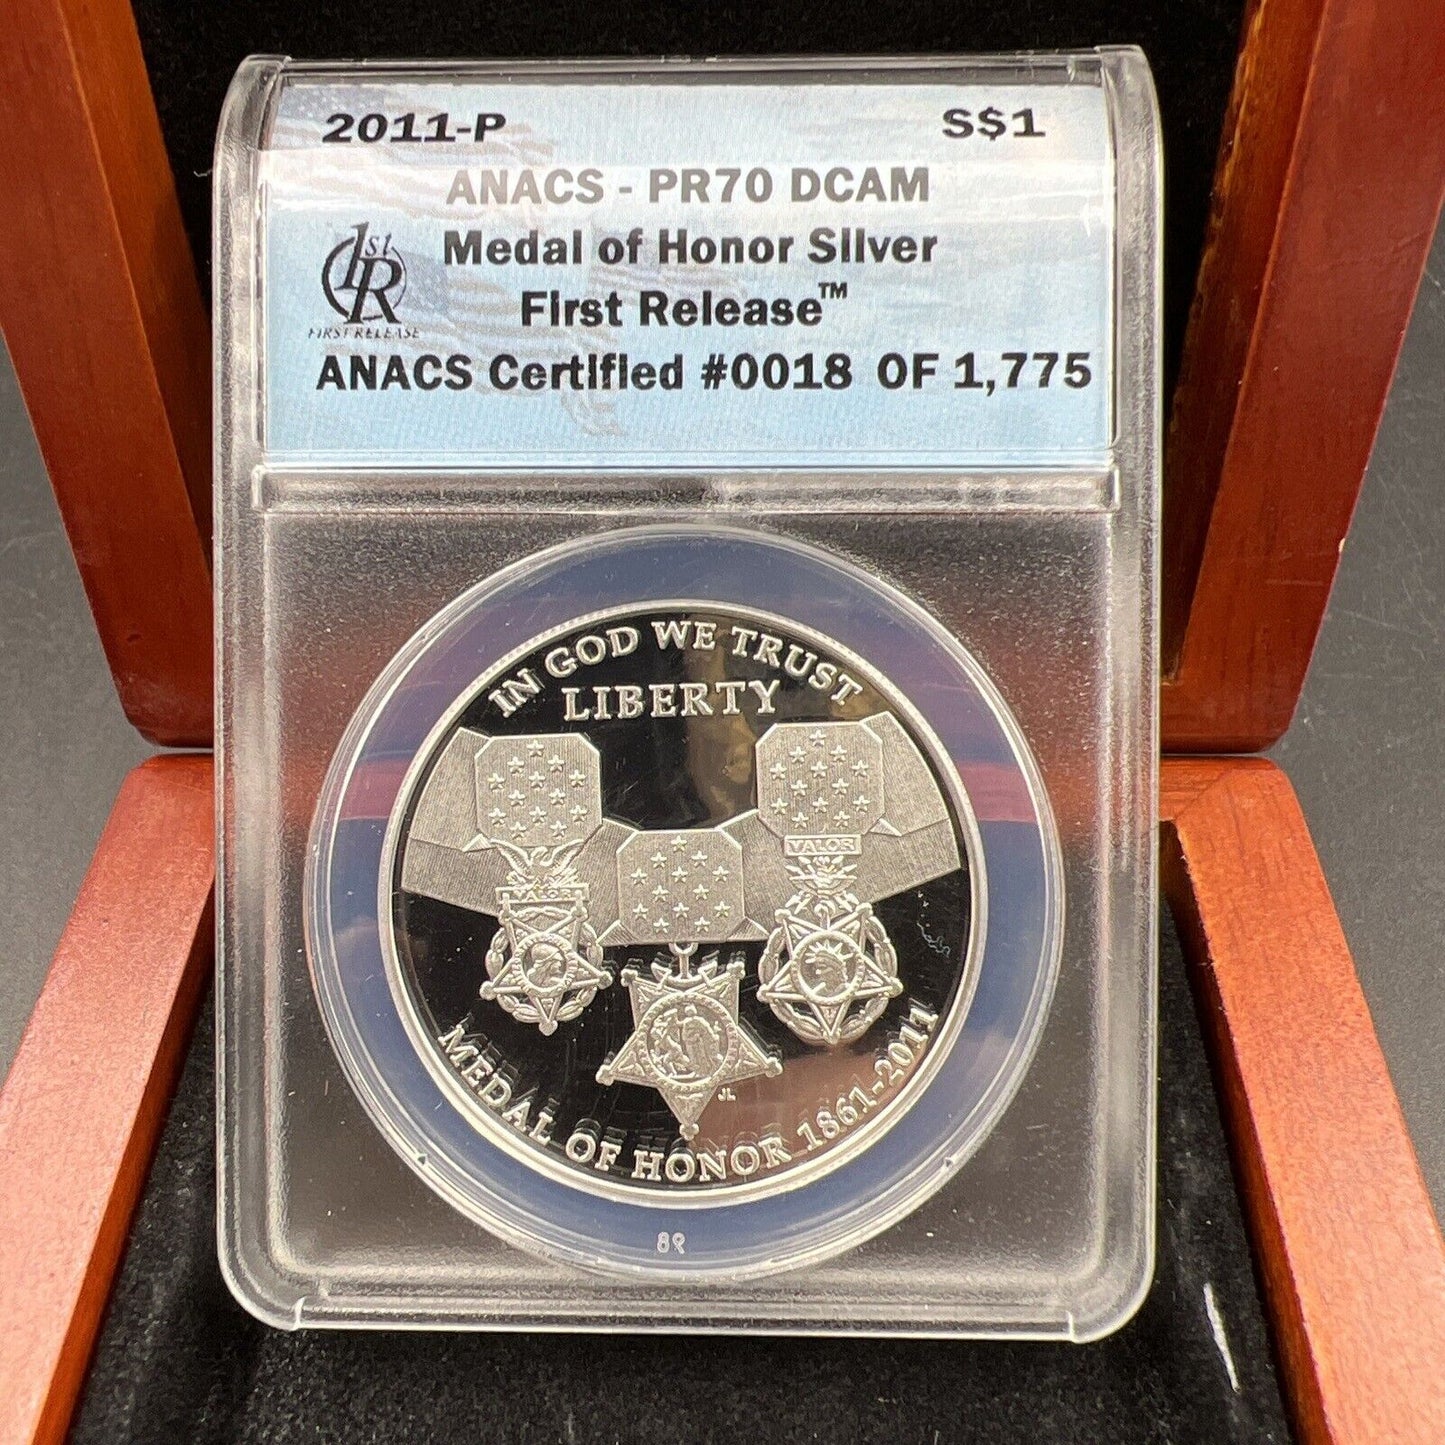 2011 P Medal Of Honor 90% Silver Dollar Coin PR70 DCAM ANACS in Display Box #018